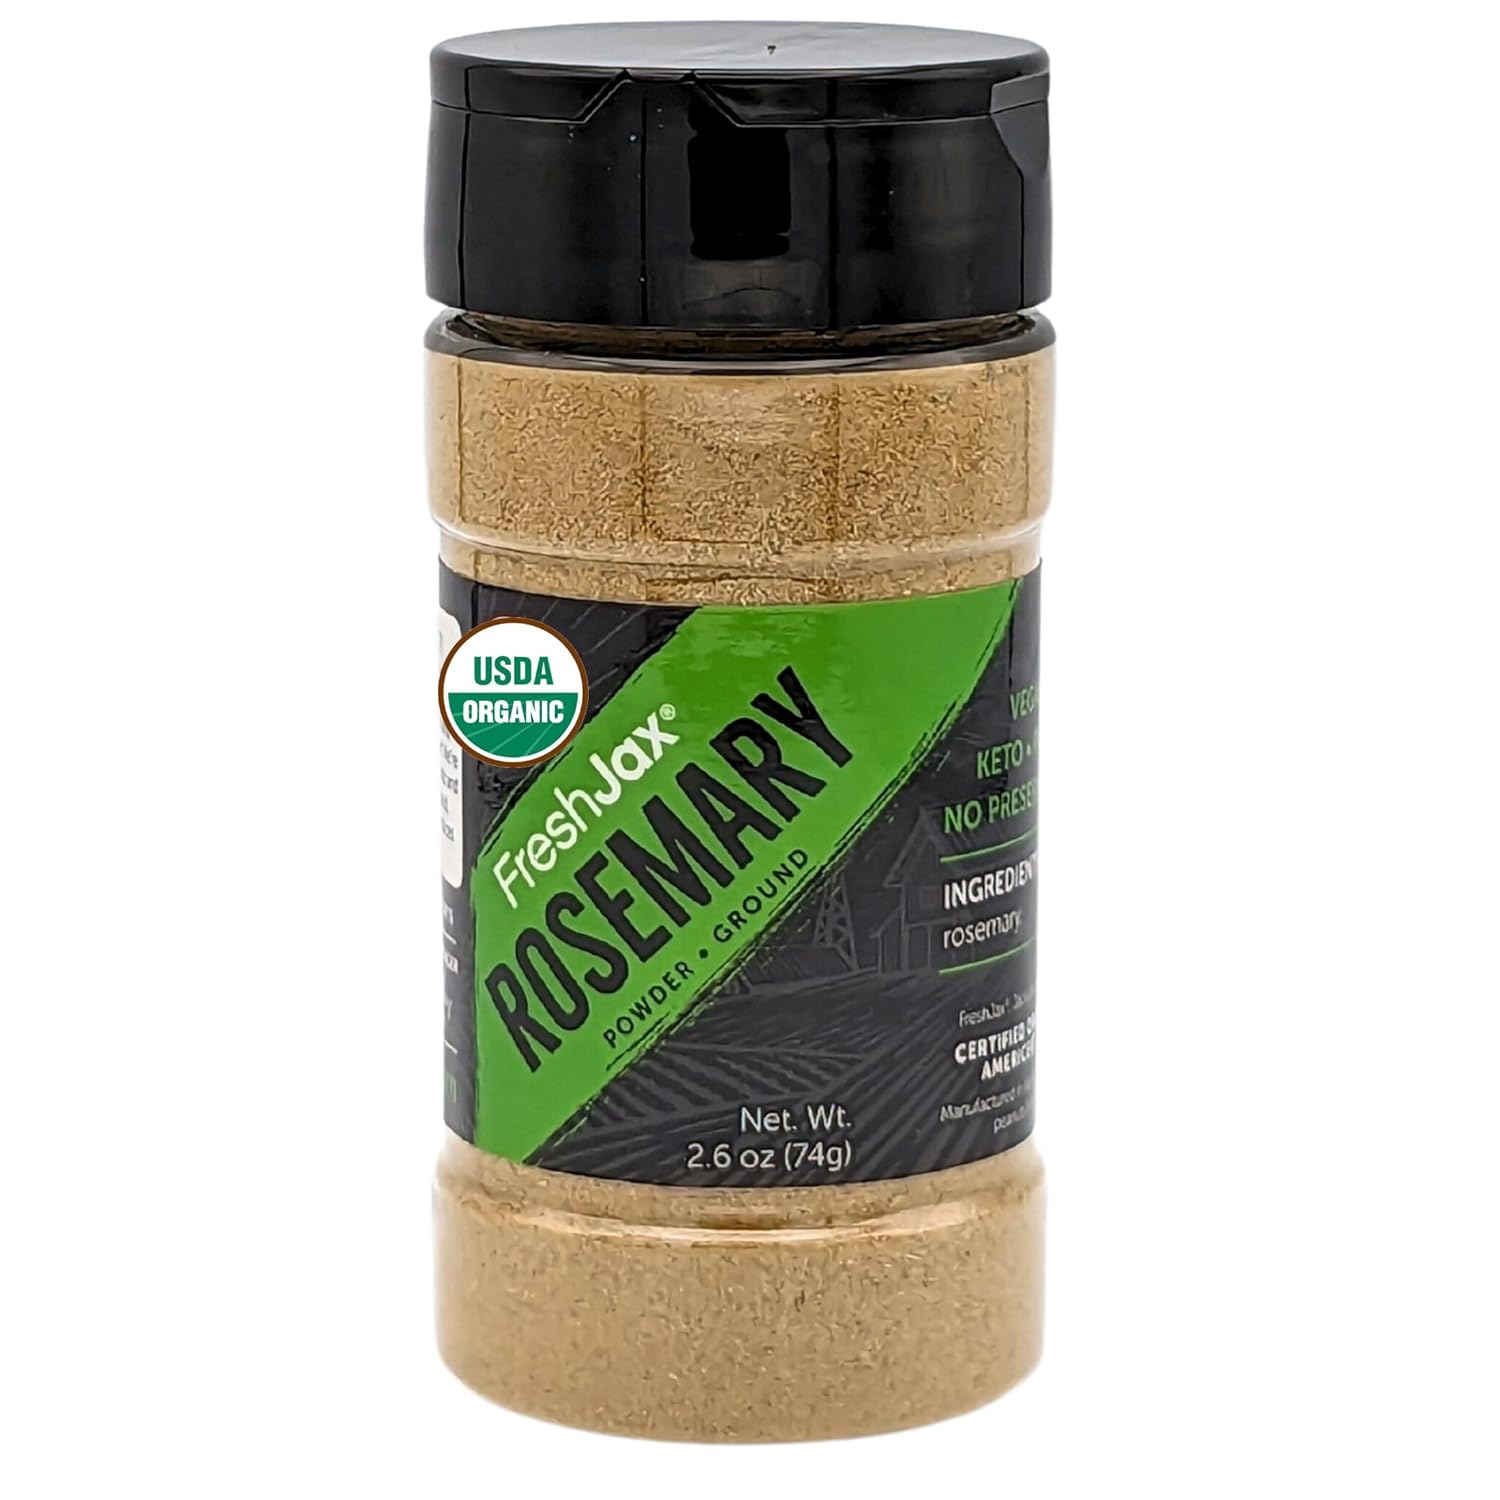 FreshJax Spices Organic Ground Rosemary Powder (2.6 oz Bottle) Non GMO, Gluten Free, Keto, Paleo, No Preservatives Ground Dried Rosemary Leaves | Handcrafted in Jacksonville, Florida